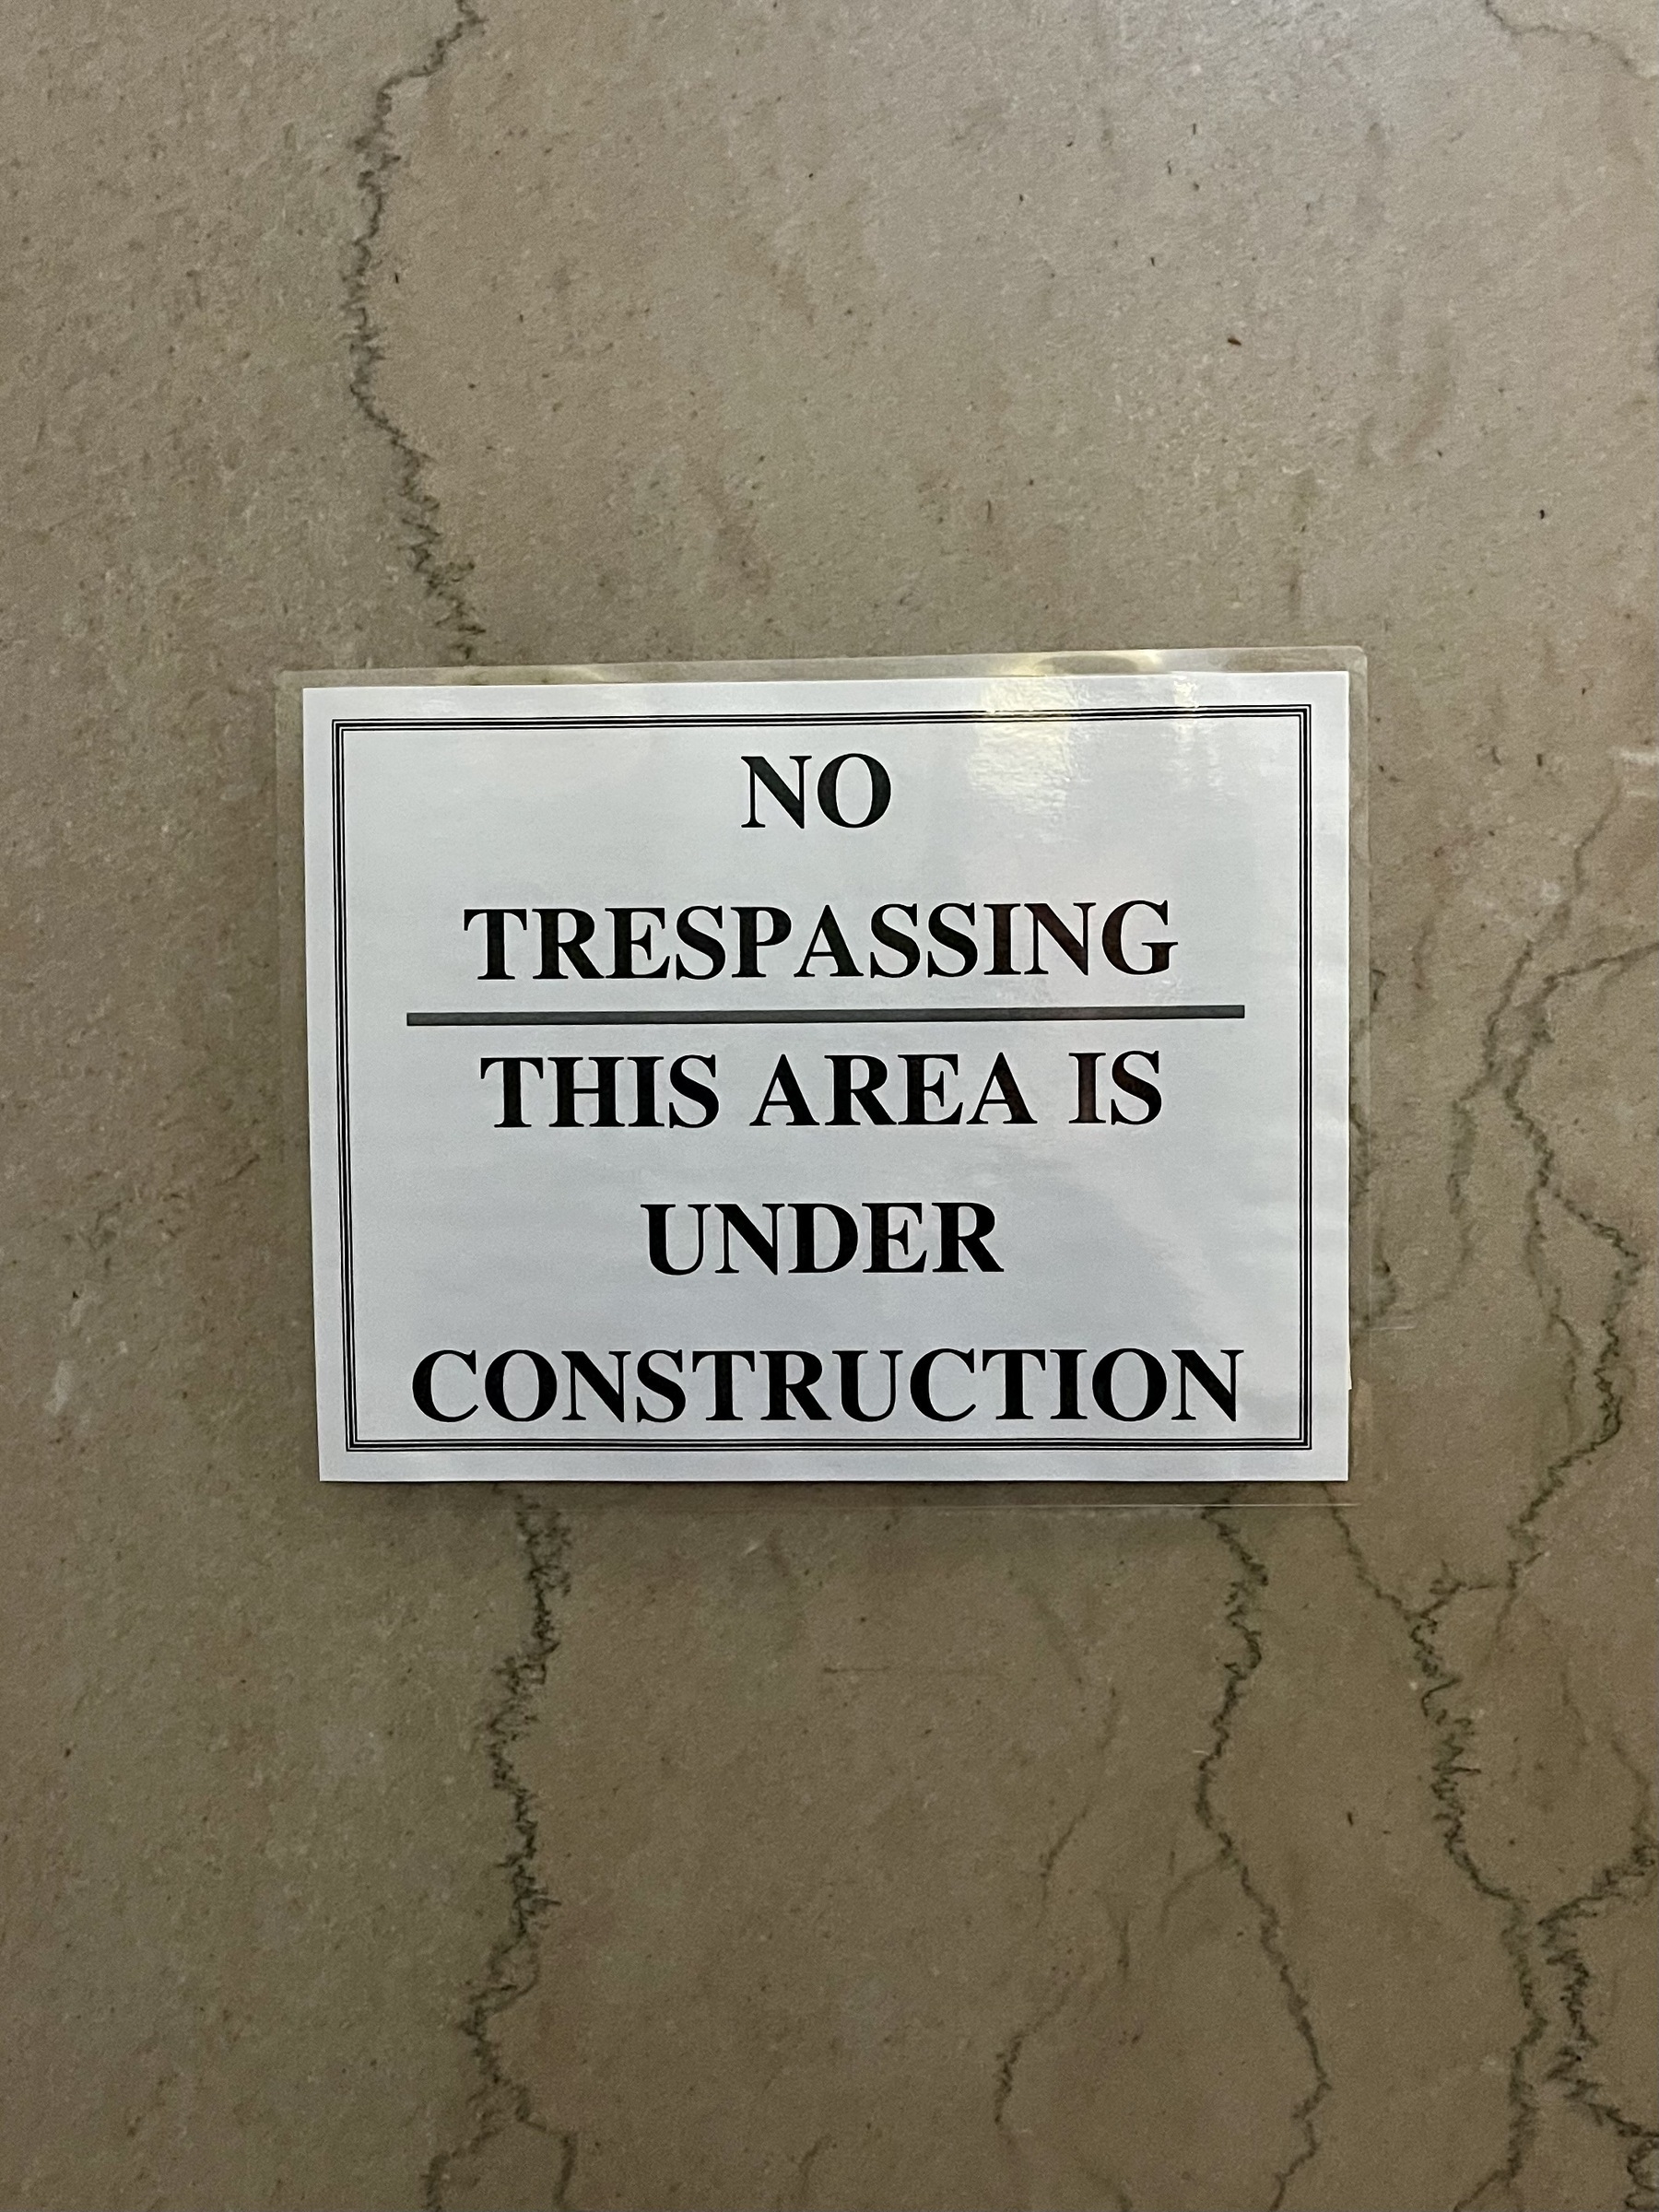 Sign on wall: “No trespassing. This area is under construction“